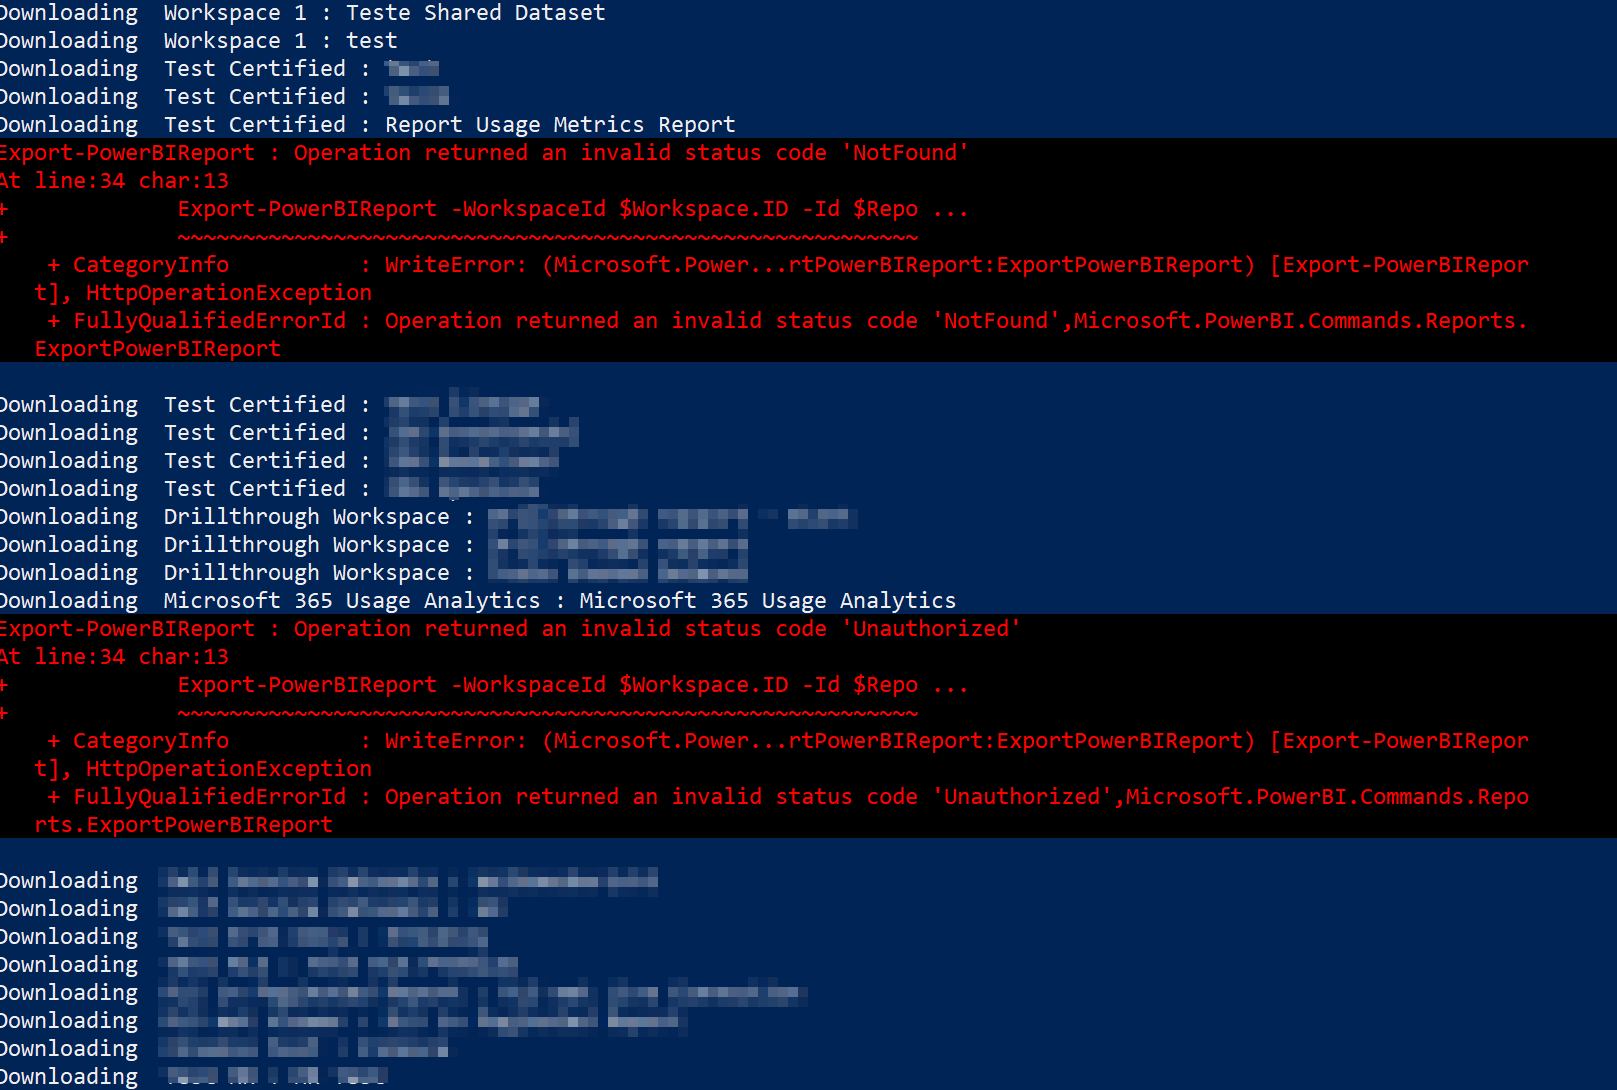 Downloading notification in PowerShell